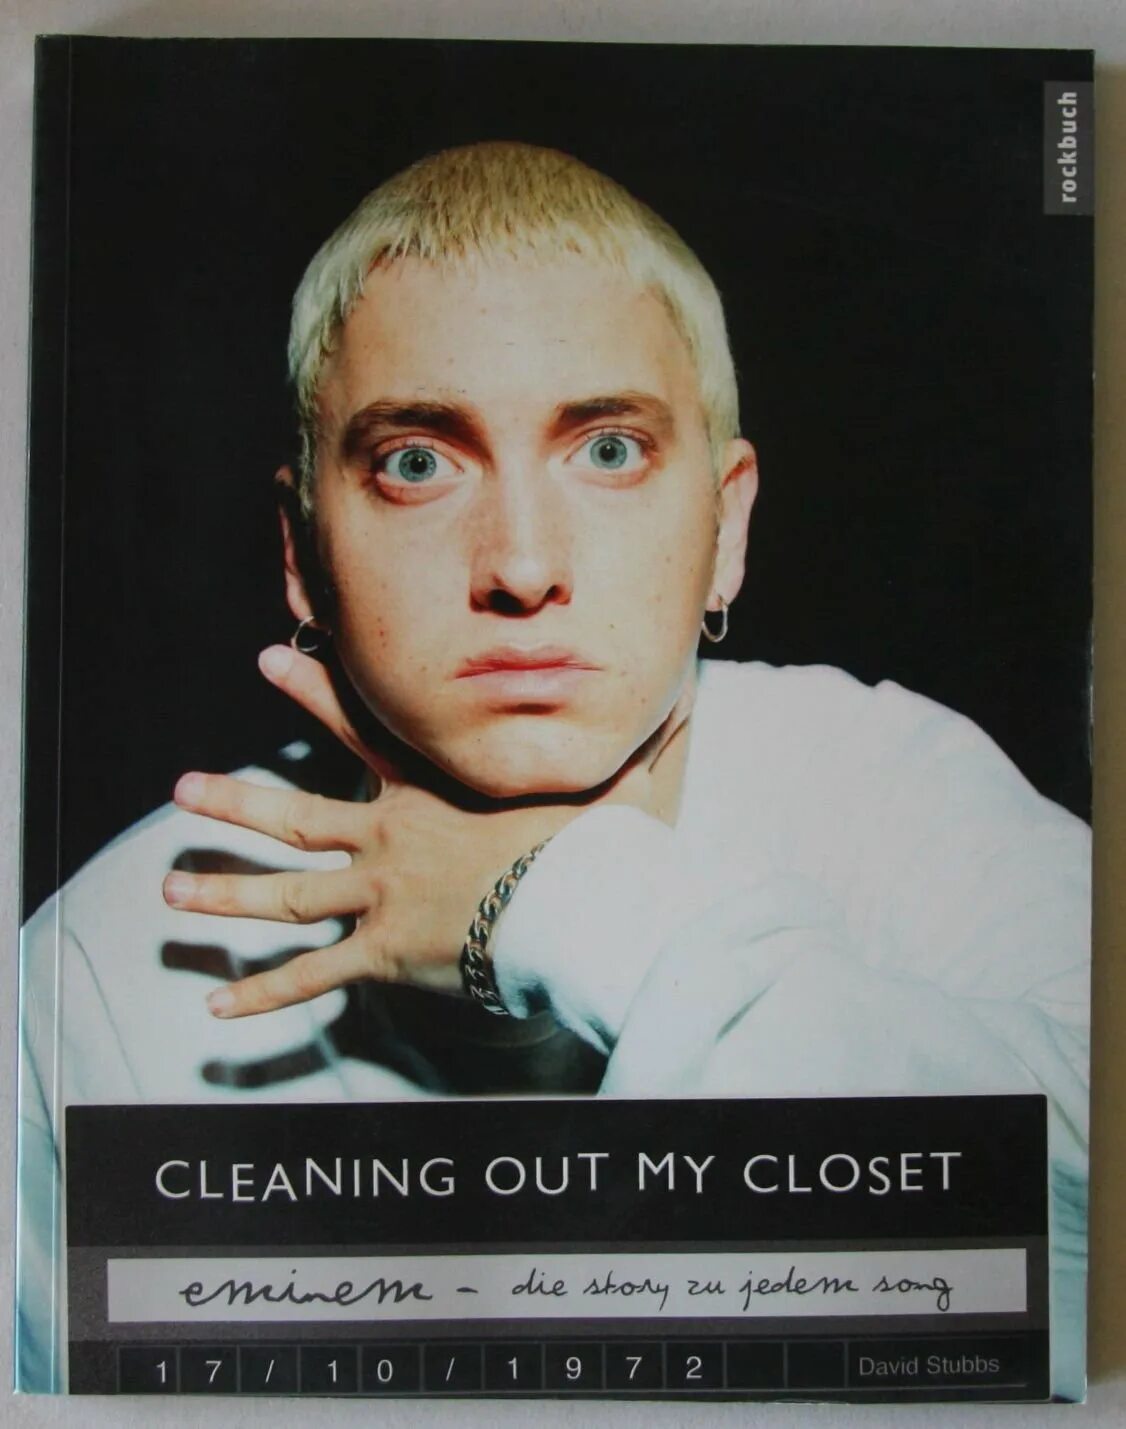 I was cleaning out my. Эминем Cleanin out my Closet. Eminem Buzz Cut. Eminem Cleanin out my Closet на обои. Cleanin' out my Closet перевод.